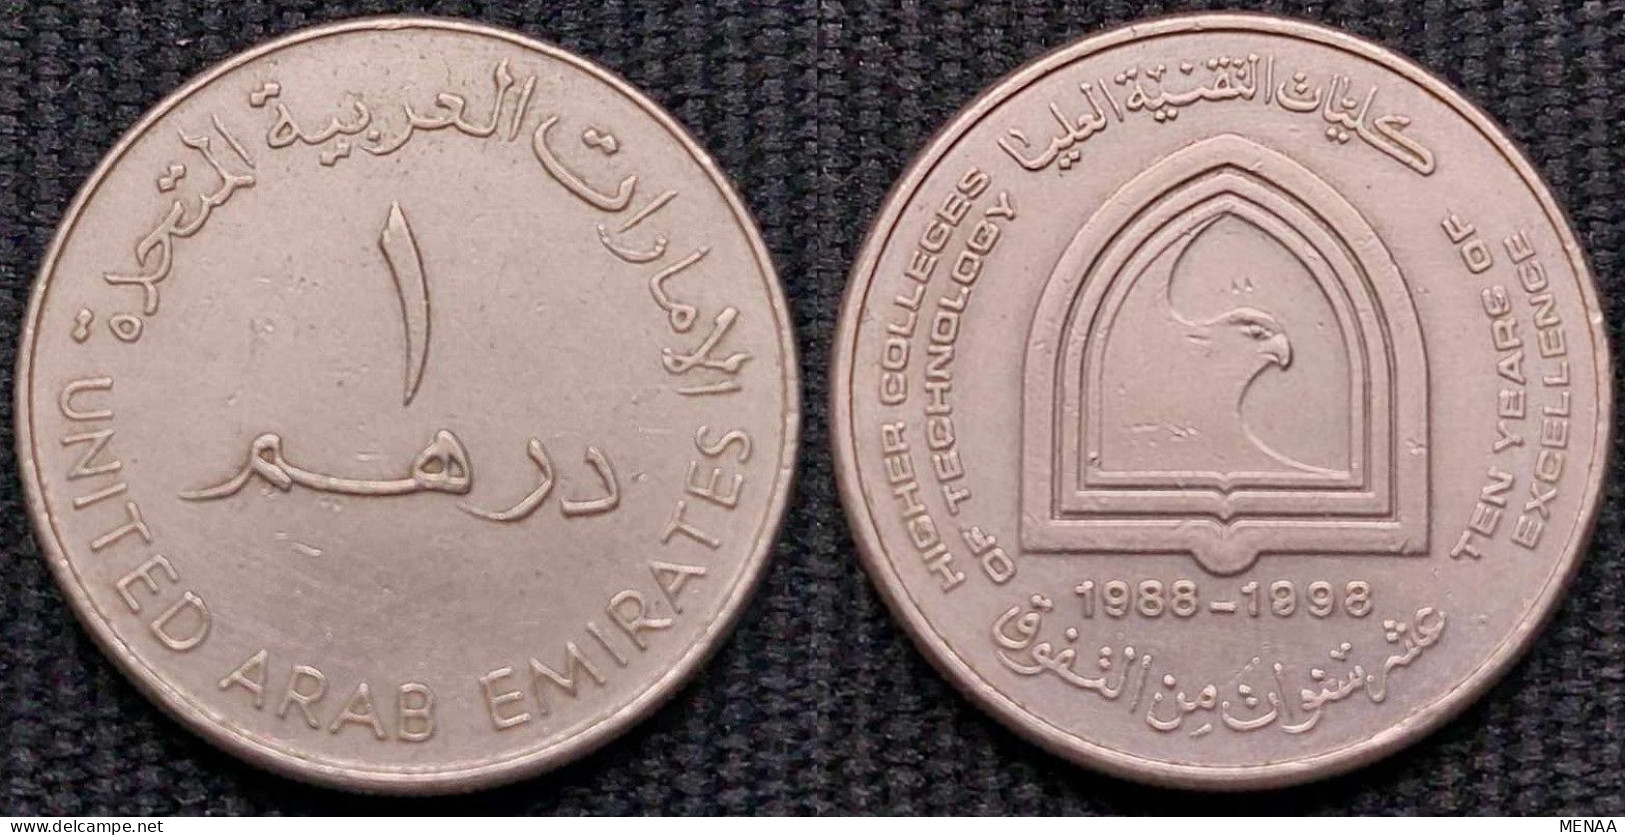 United Arab Emirates - 1 Dirham -1998 - The 10th Anniversary Of The Higher Colleges Of Technology-  - KM 35 - Emiratos Arabes